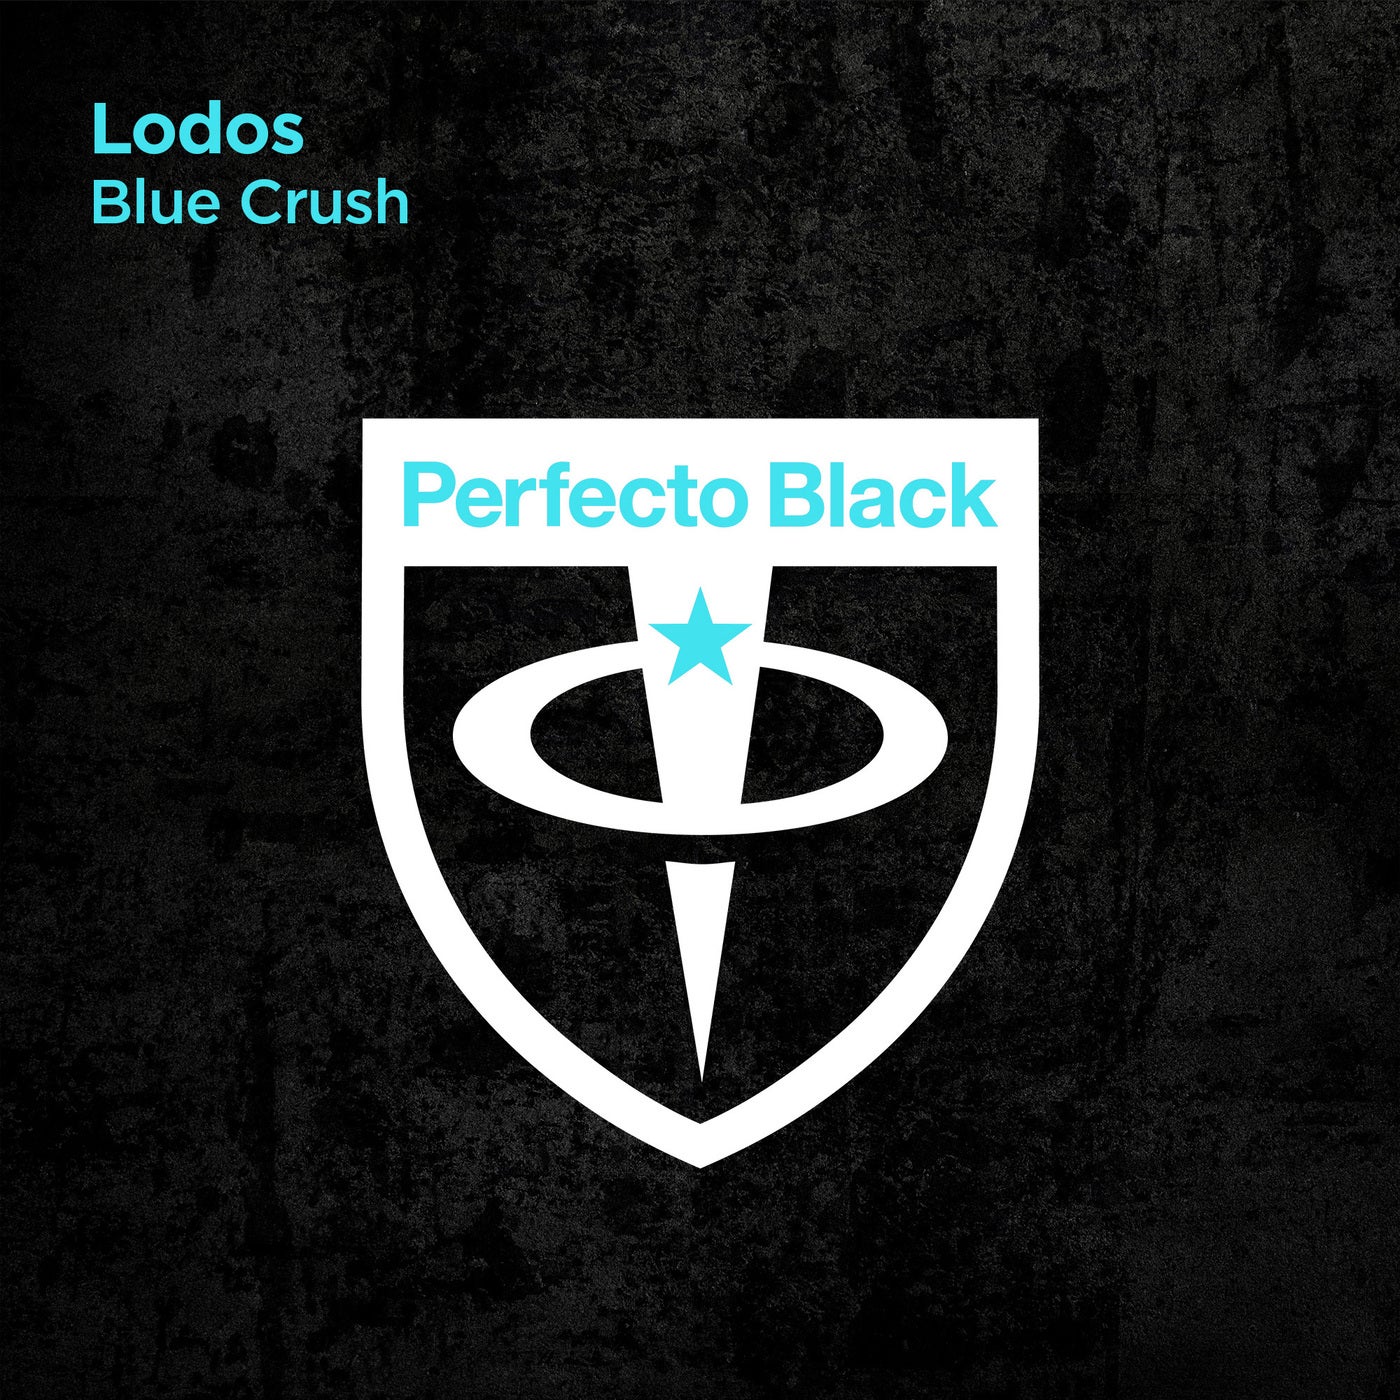 image cover: Lodos - Blue Crush on Perfecto Black